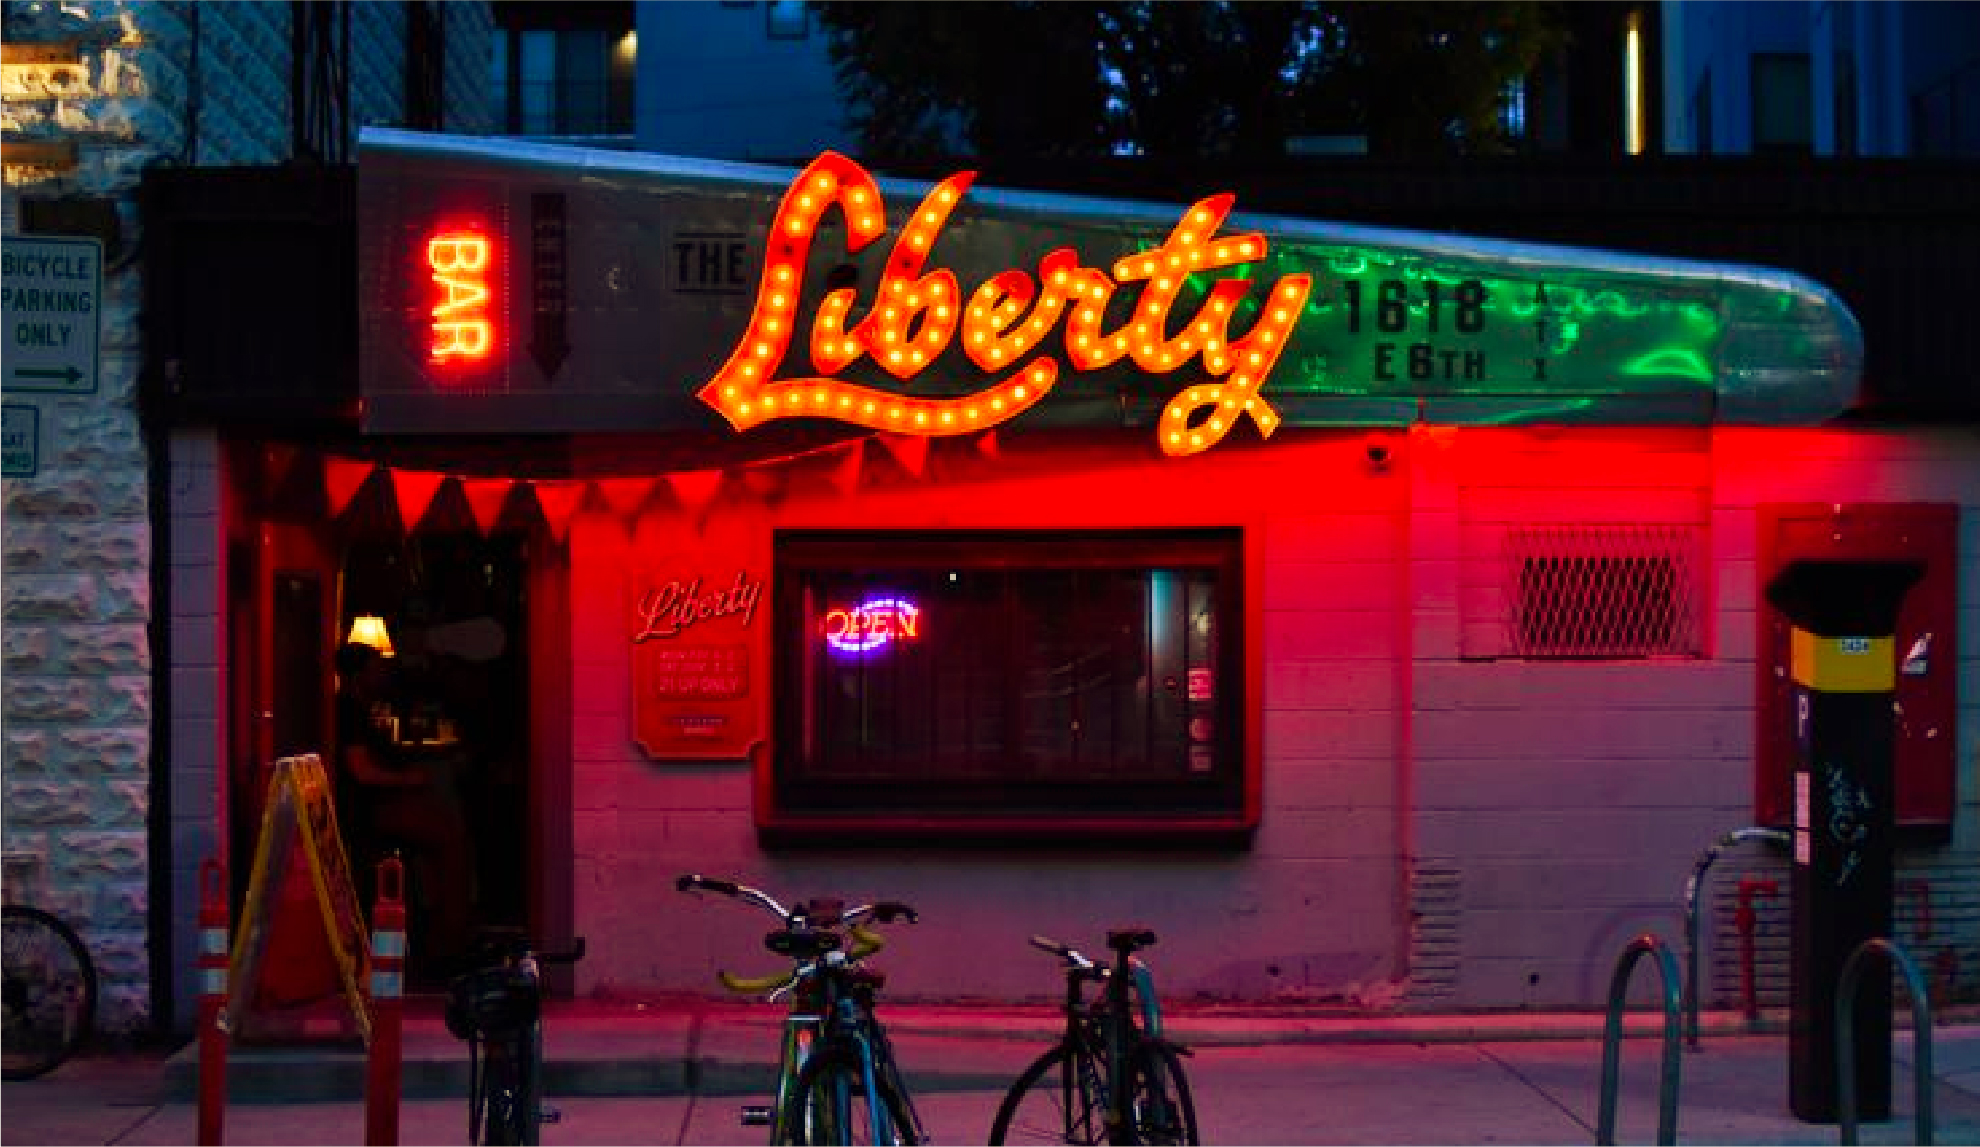 entrance to the liberty to have some great beers on sixth street